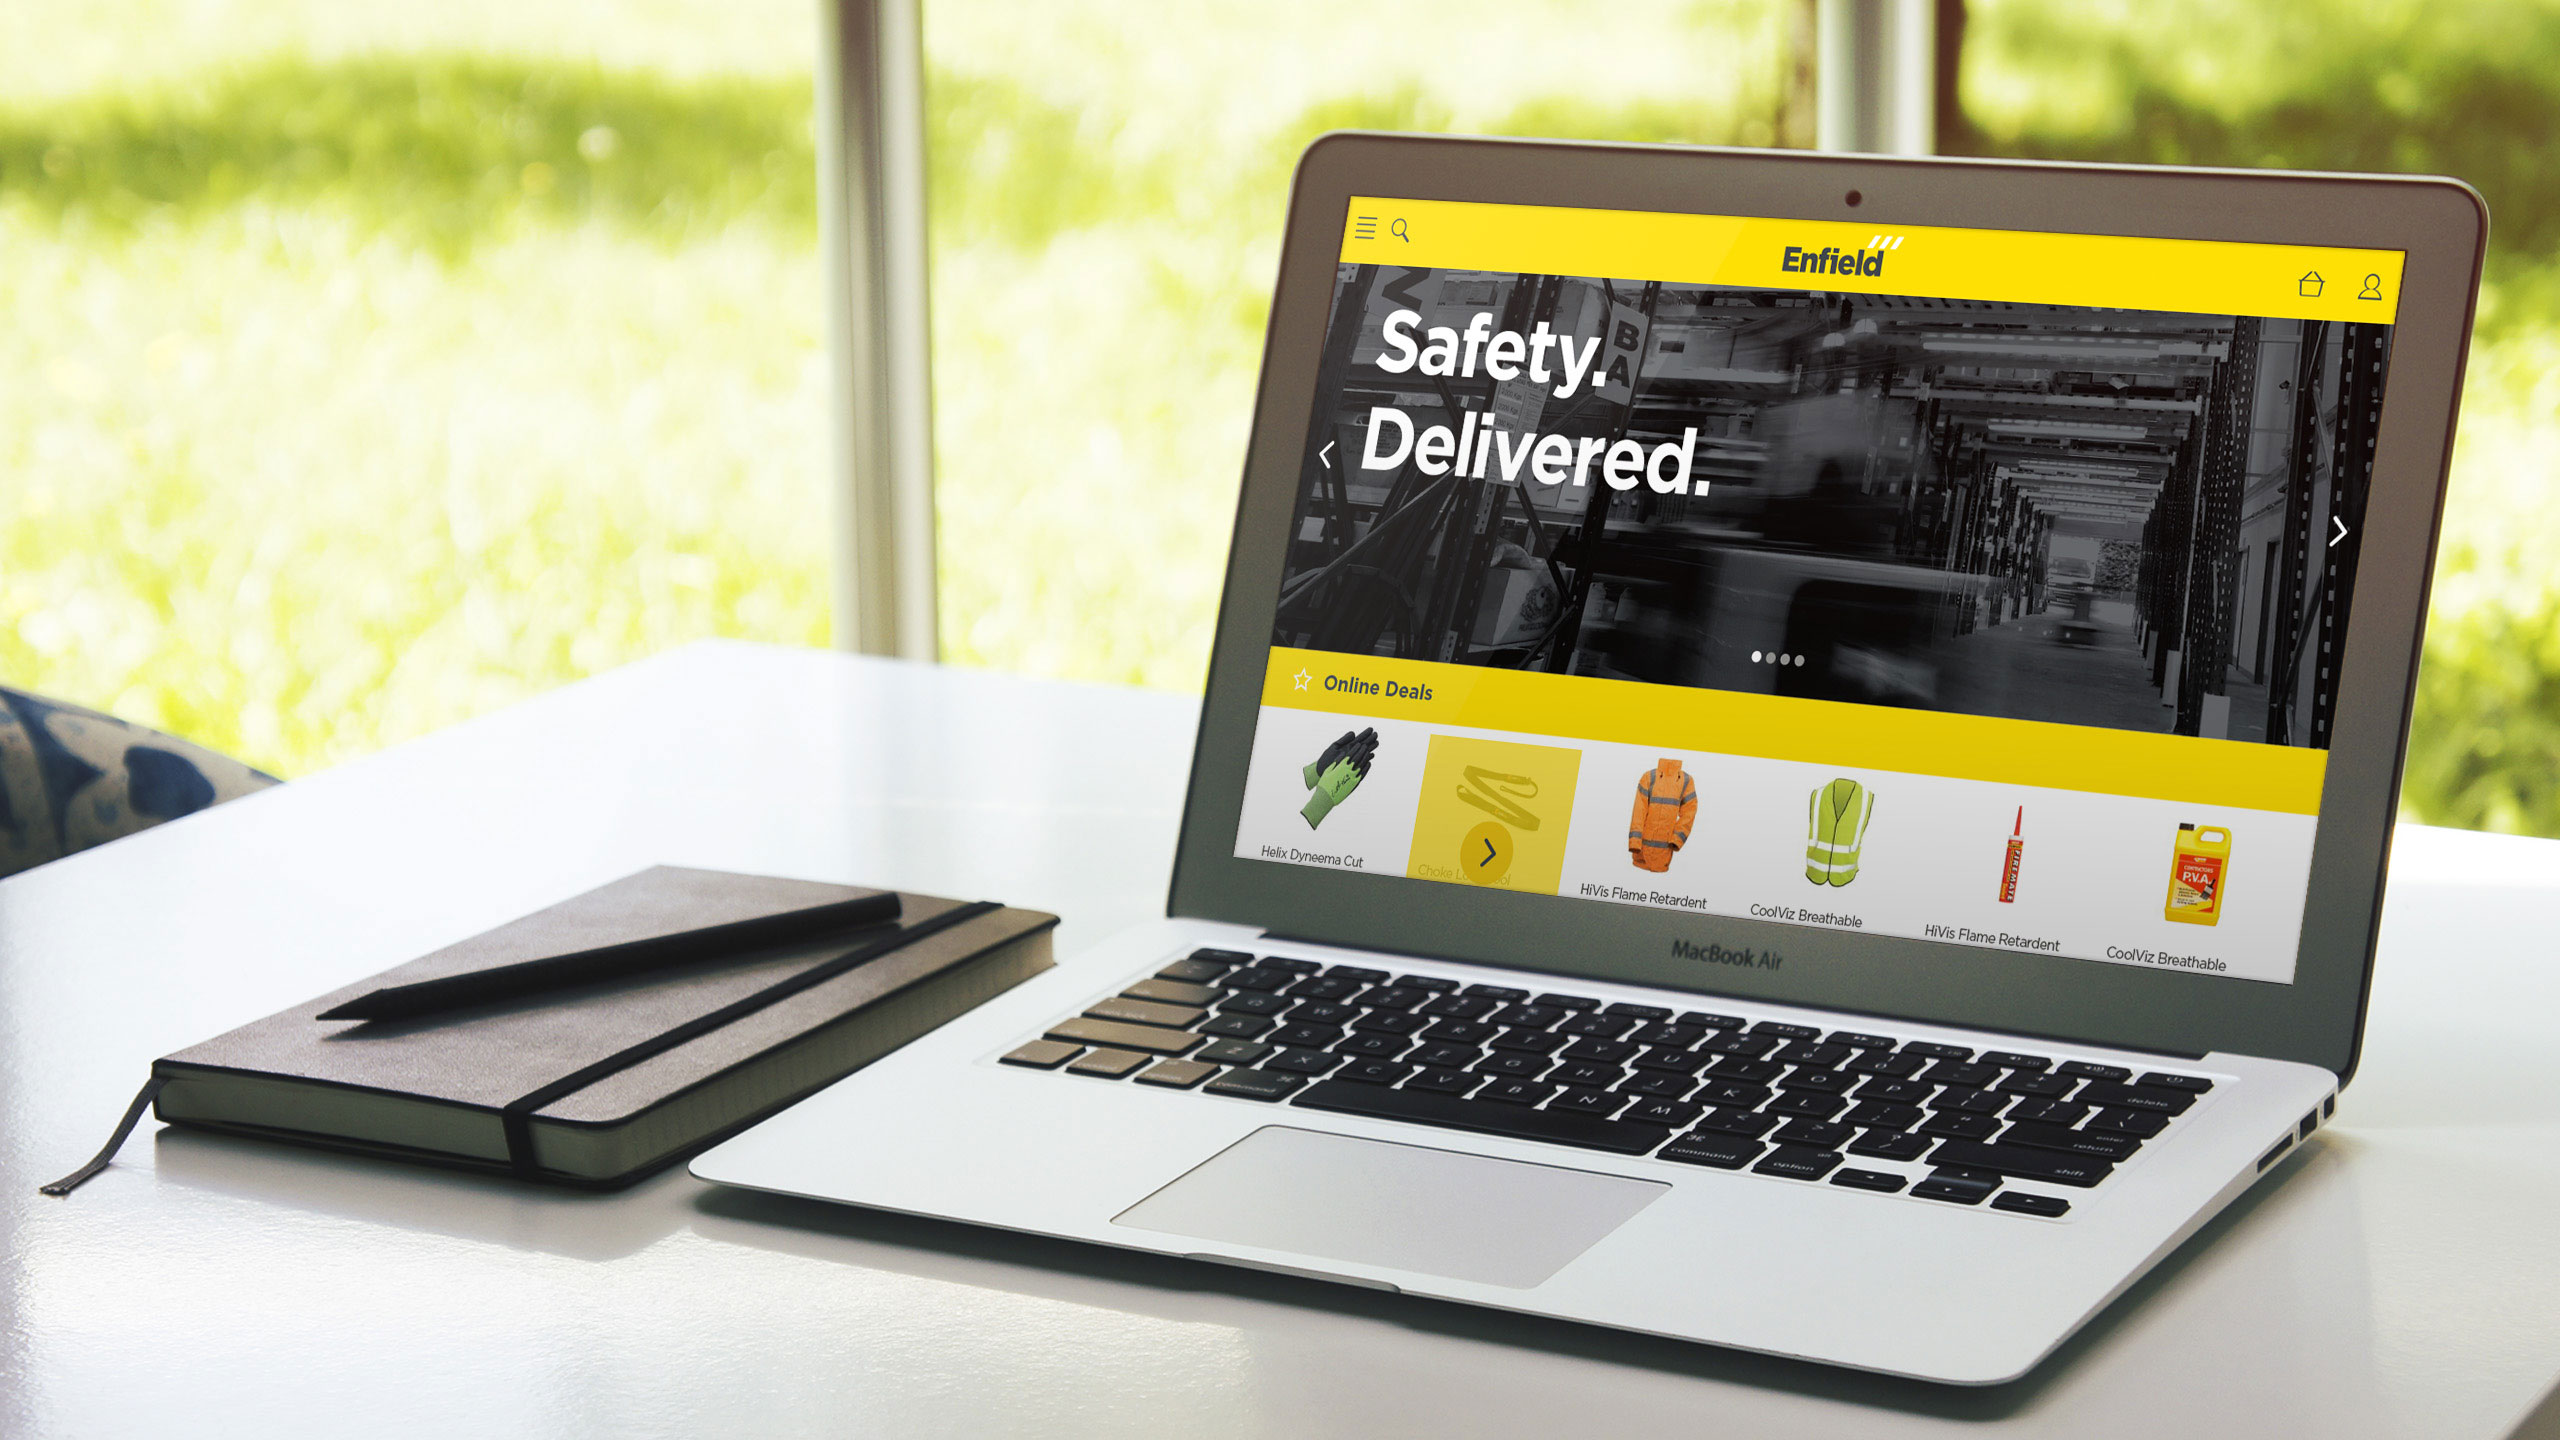 Enfield Safety Website On Laptop